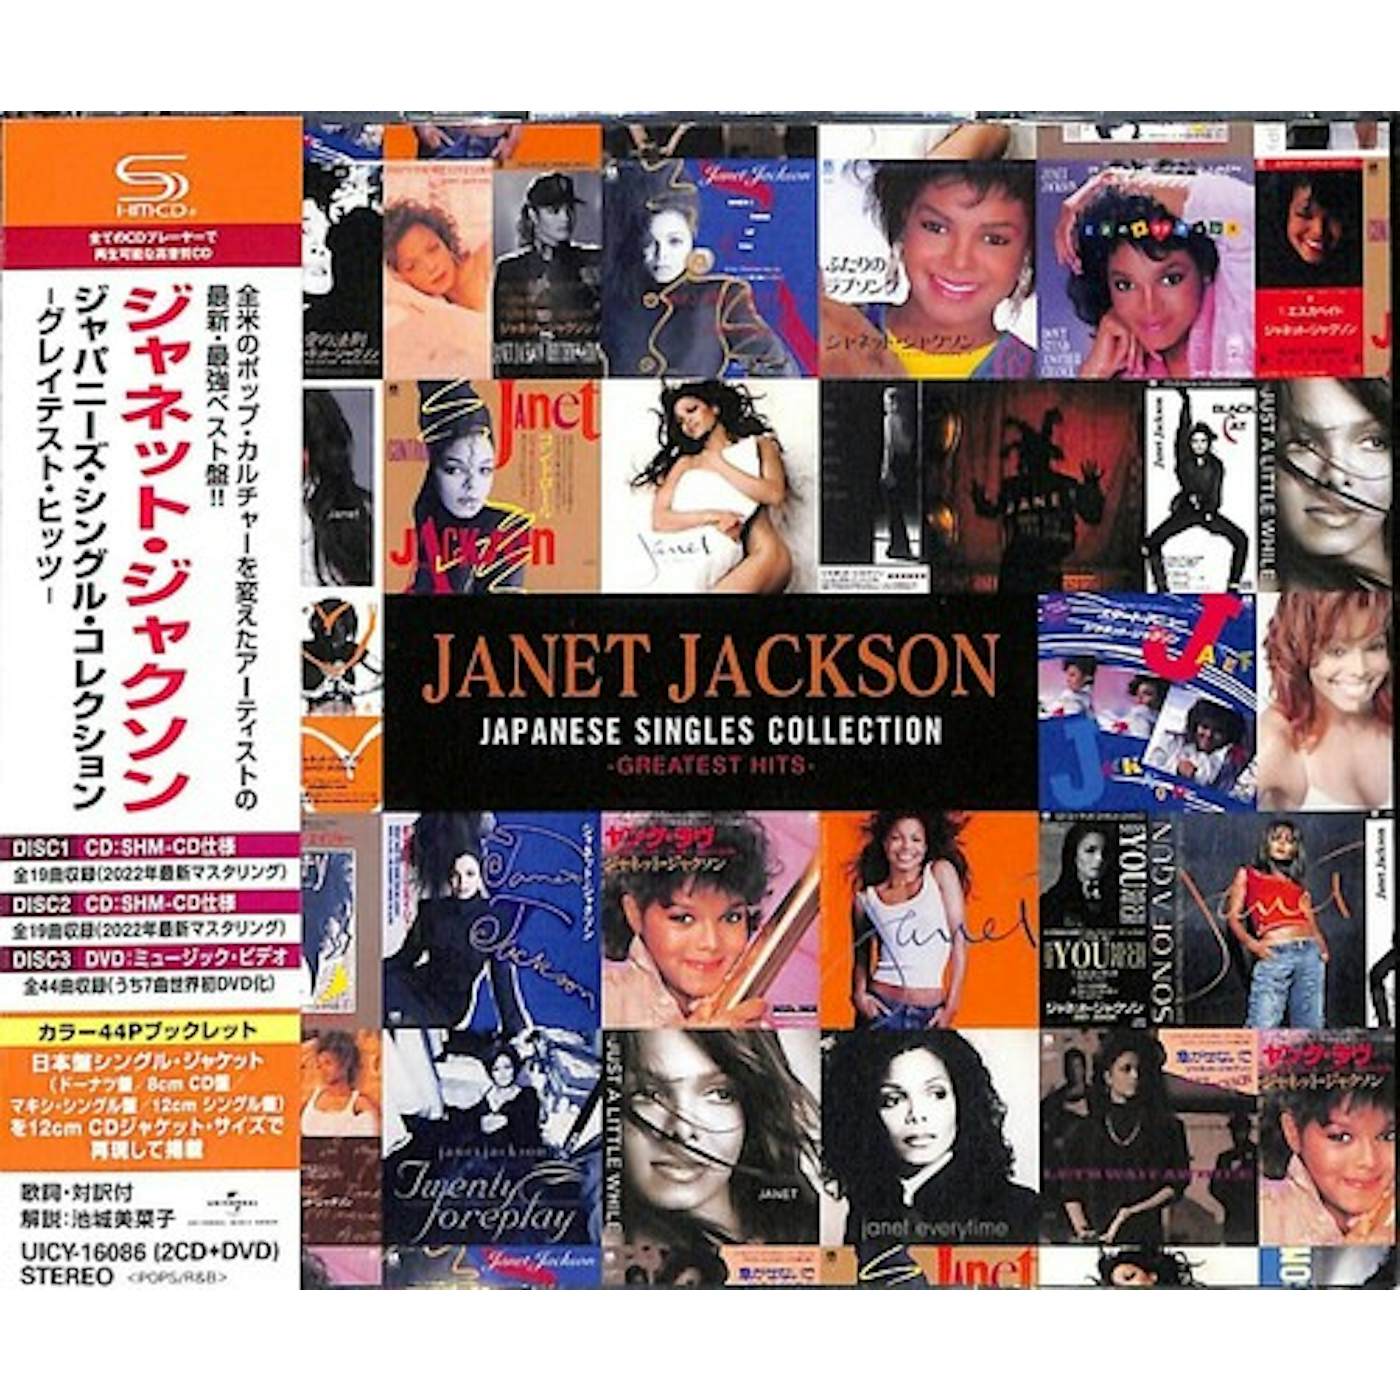 Janet Jackson JAPANESE SINGLES COLLECTION CD